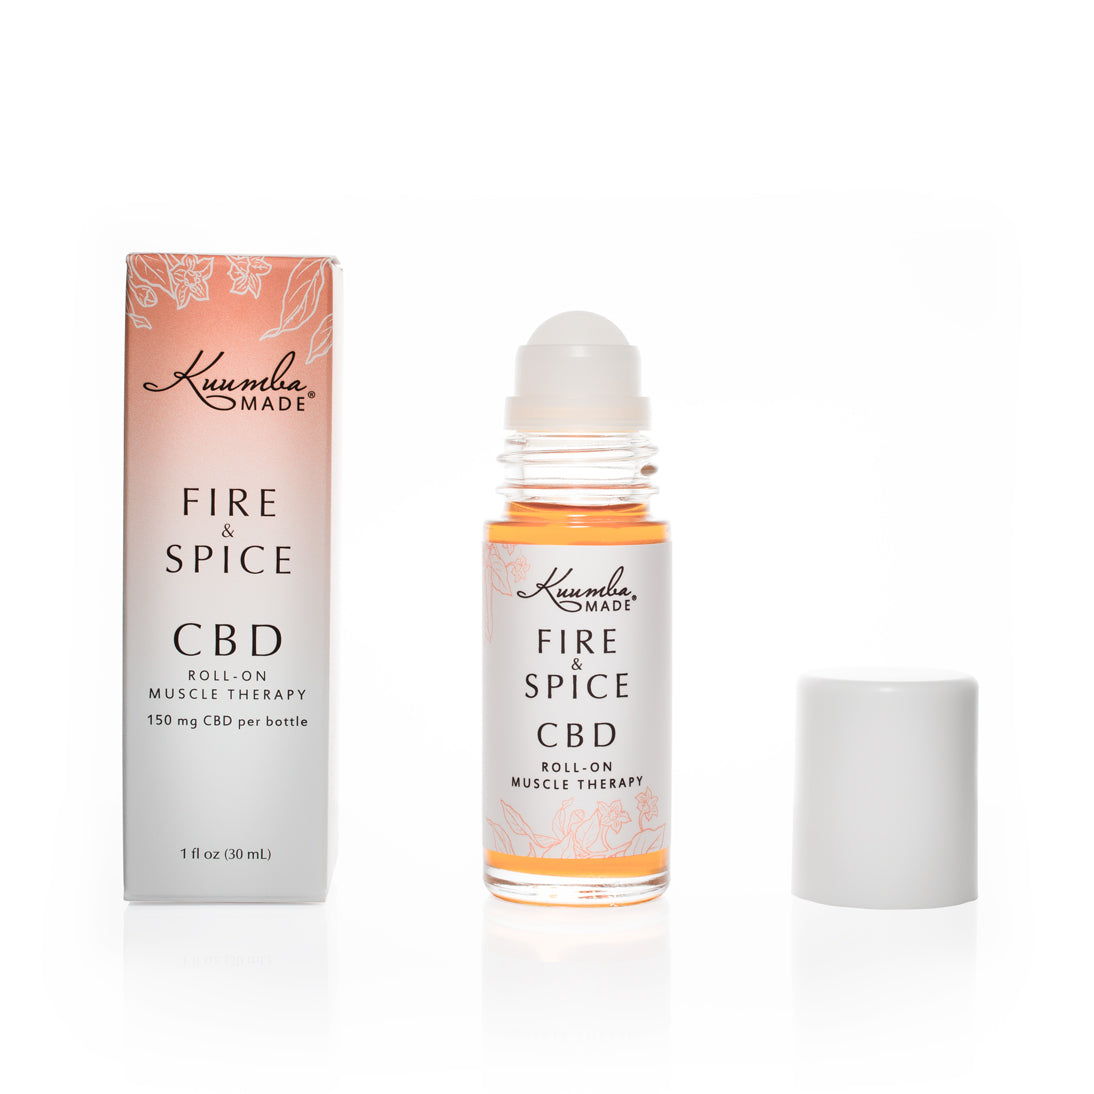 Fire And Spice Natural CBD 30ml Roll-On from Kuumba Made